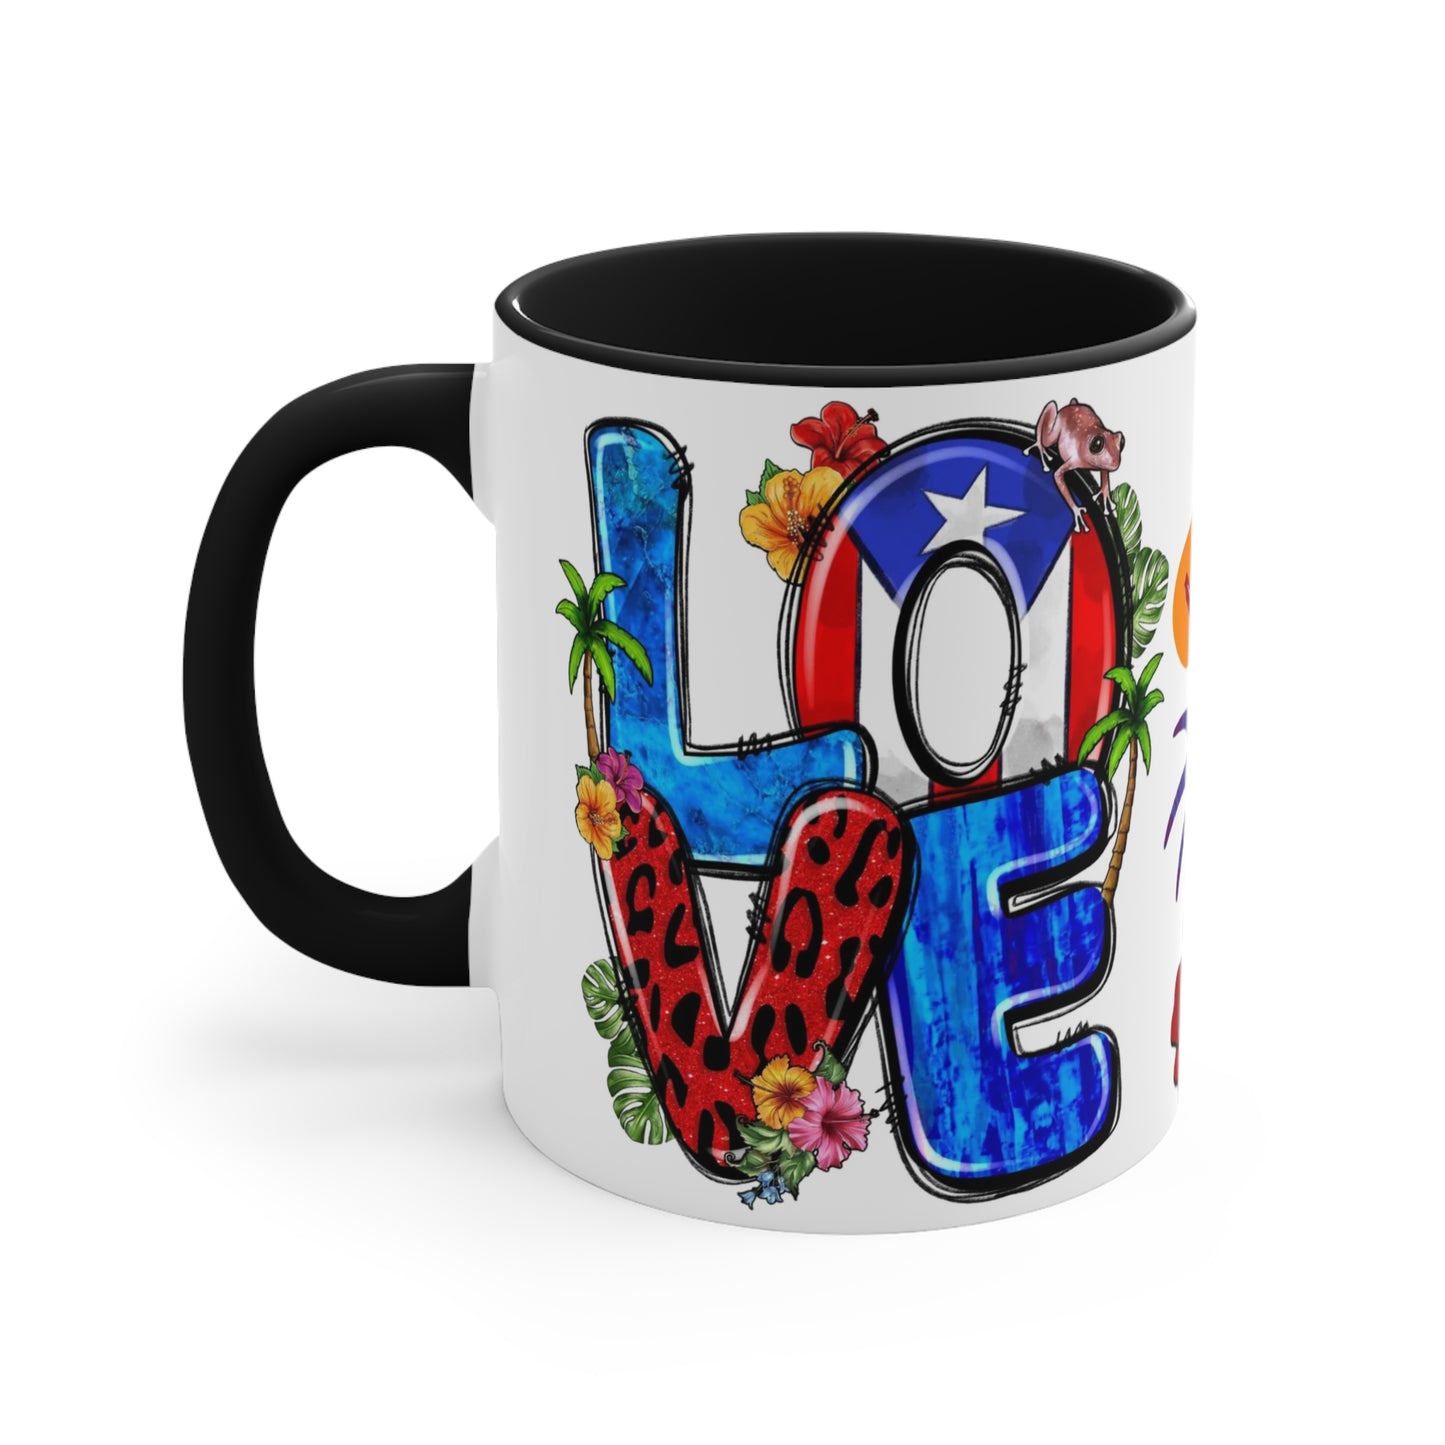 LOVE PUERTO RICO Mug with Puerto Rican Elements - Mugscity - Free Shipping - Available with Red, Blue or Black Accents